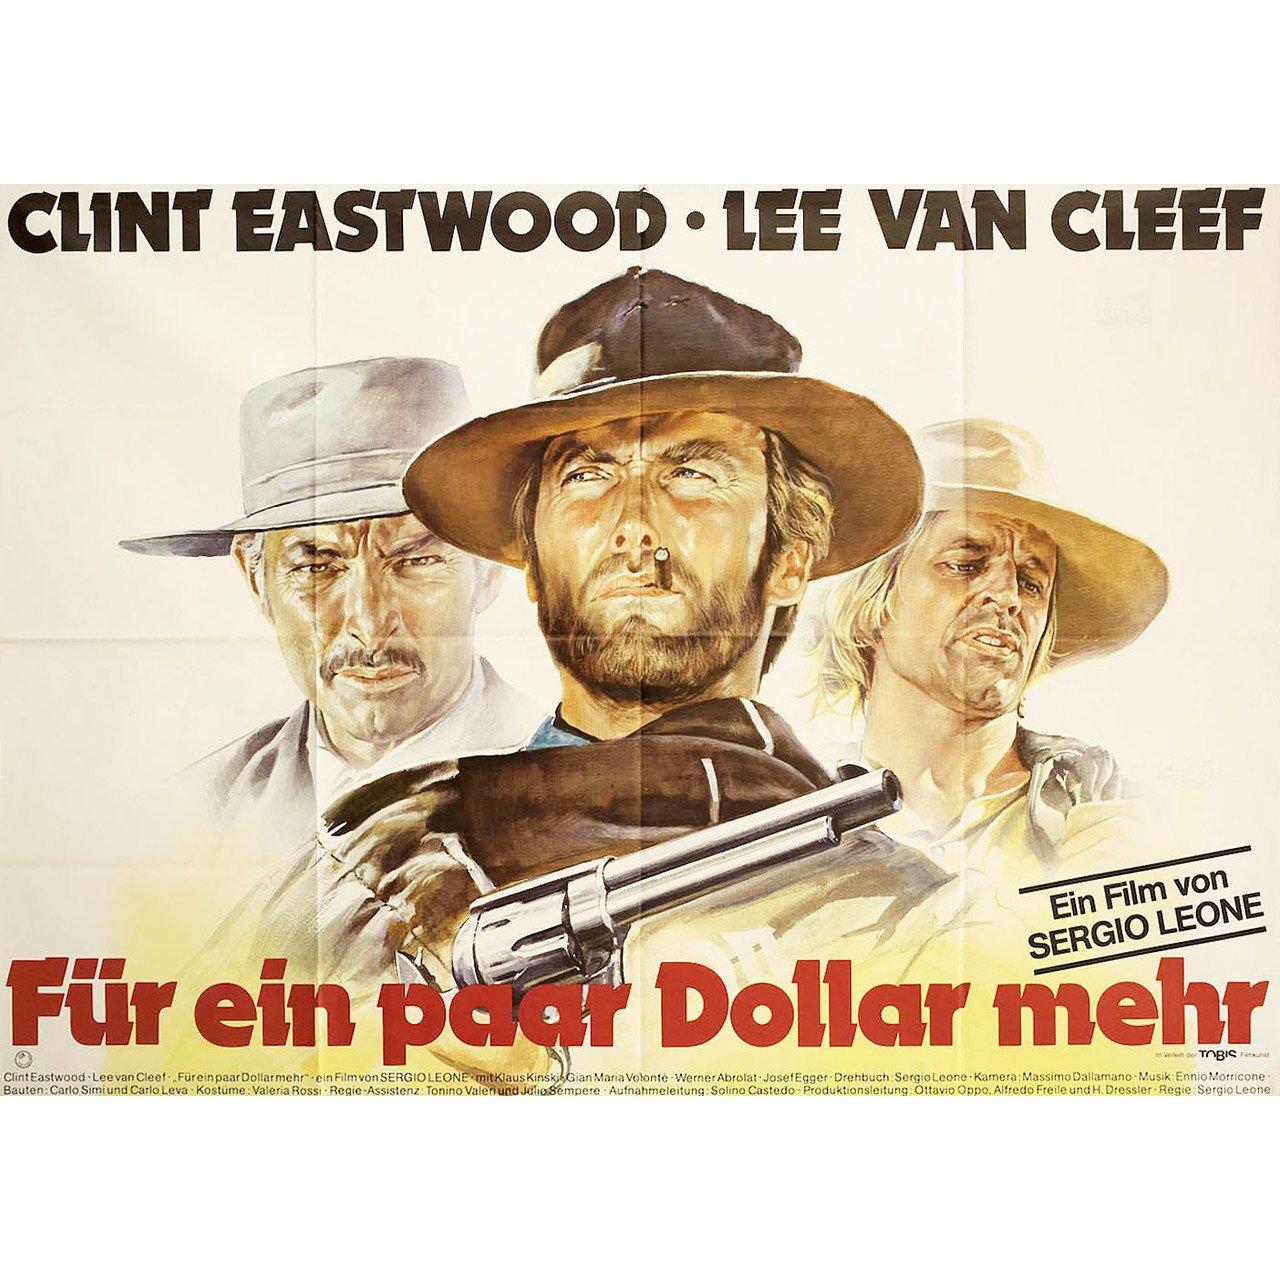 Original 1980s re-release German A0 poster by Renato Casaro for the 1965 film For a Few Dollars More (Per qualche dollaro in piu) directed by Sergio Leone with Clint Eastwood / Lee Van Cleef / Gian Maria Volonte / Mario Brega. Very good-fine